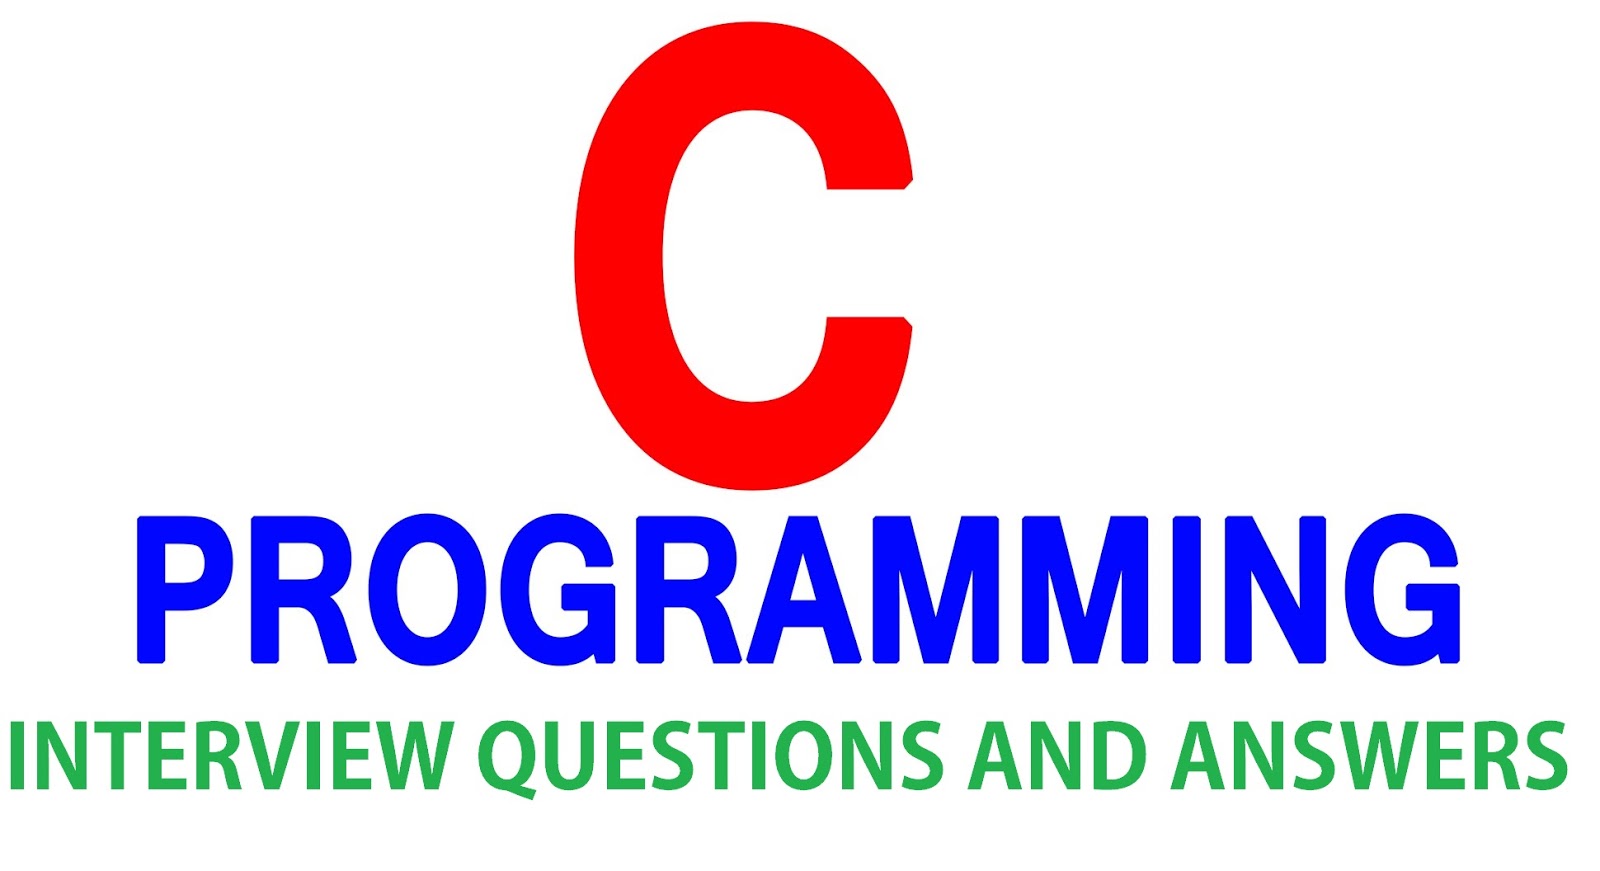 C interview questions. Interview Programming.